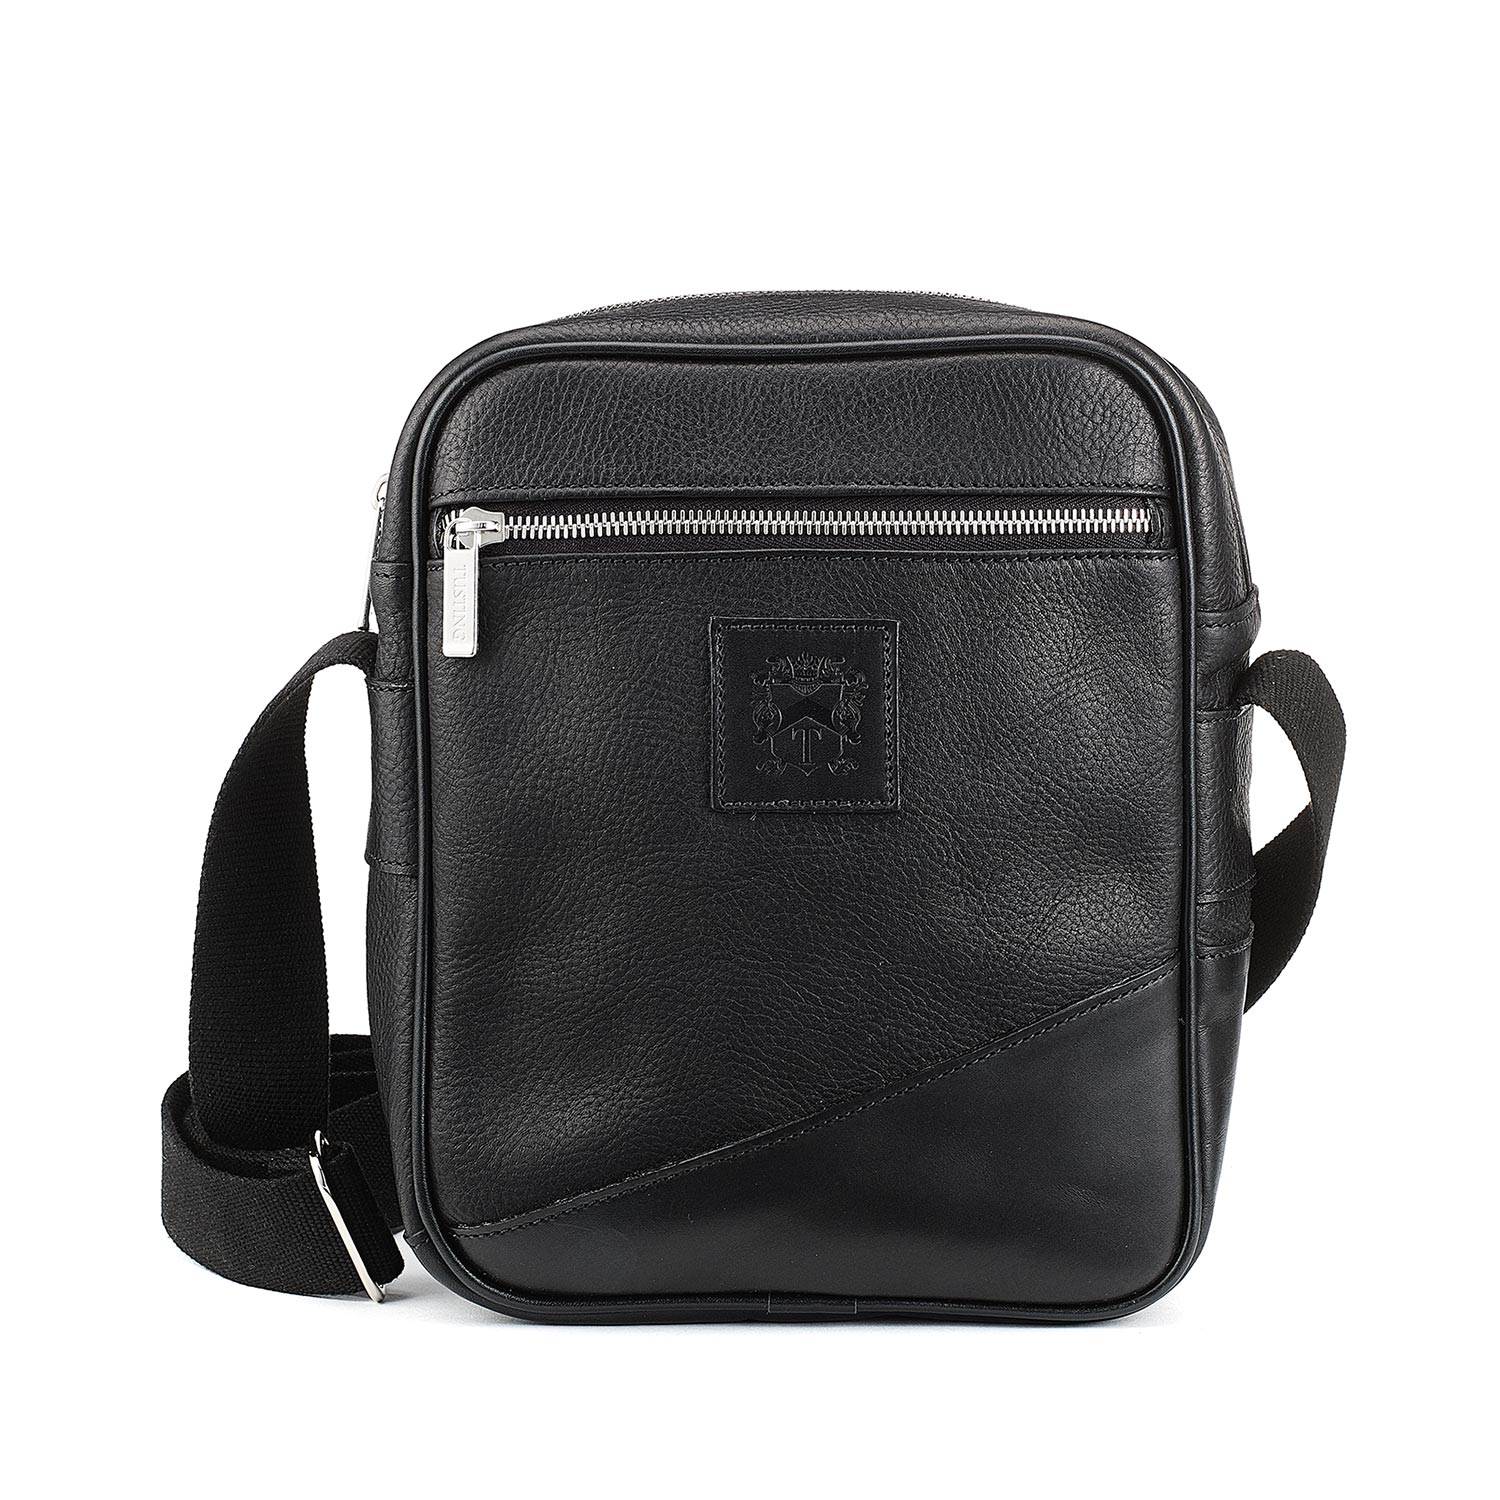 Nimrod Leather Cross Body Messenger Bag | Made in England by Tusting